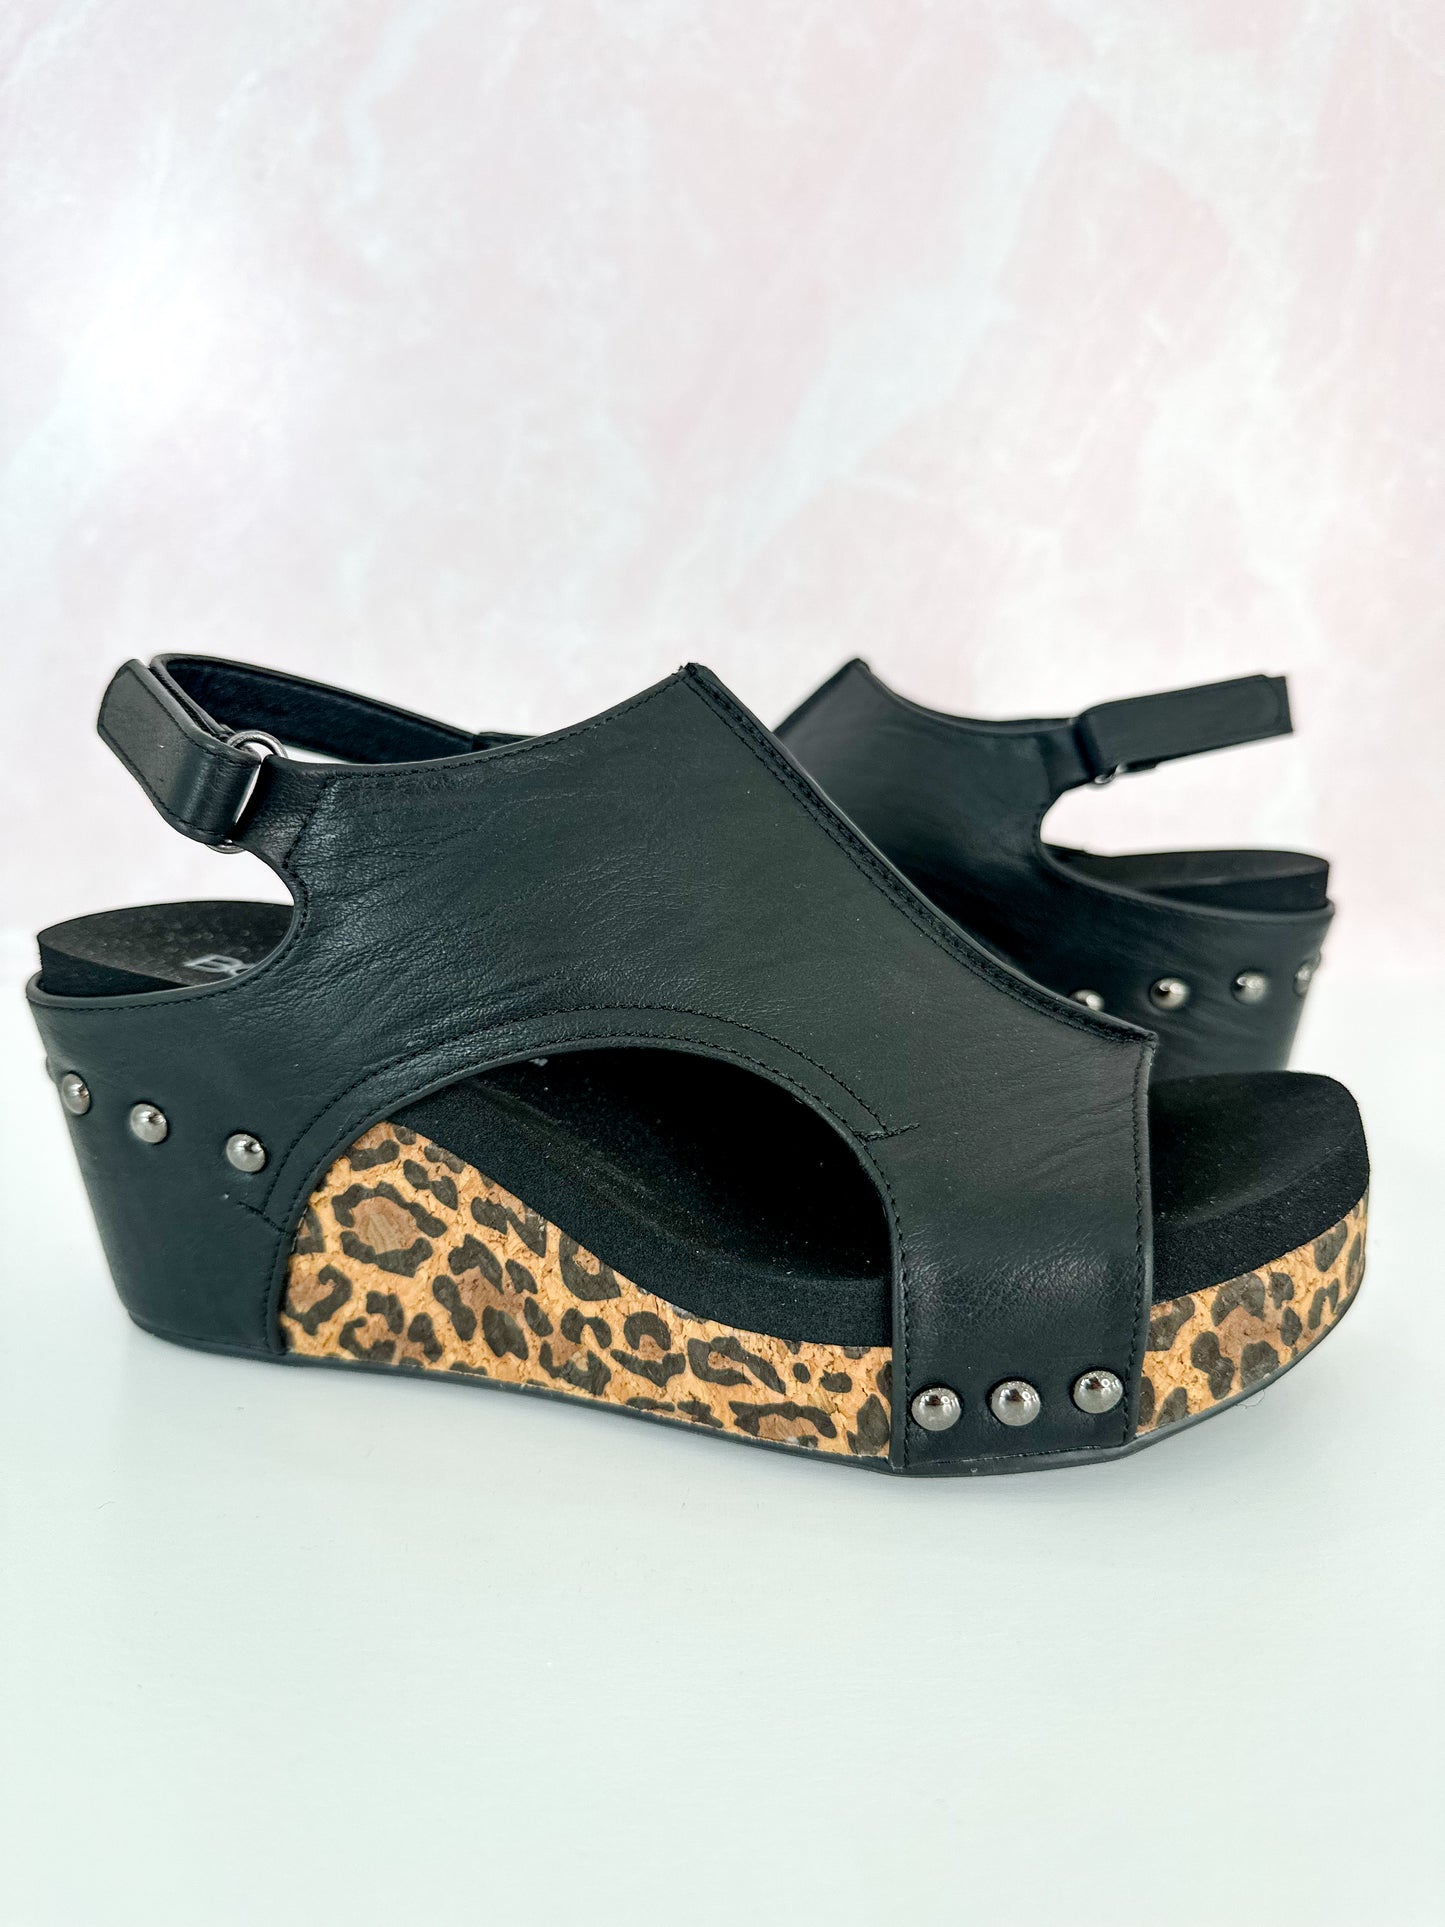 Corky's Carley Wedge - Black Smooth Leopard